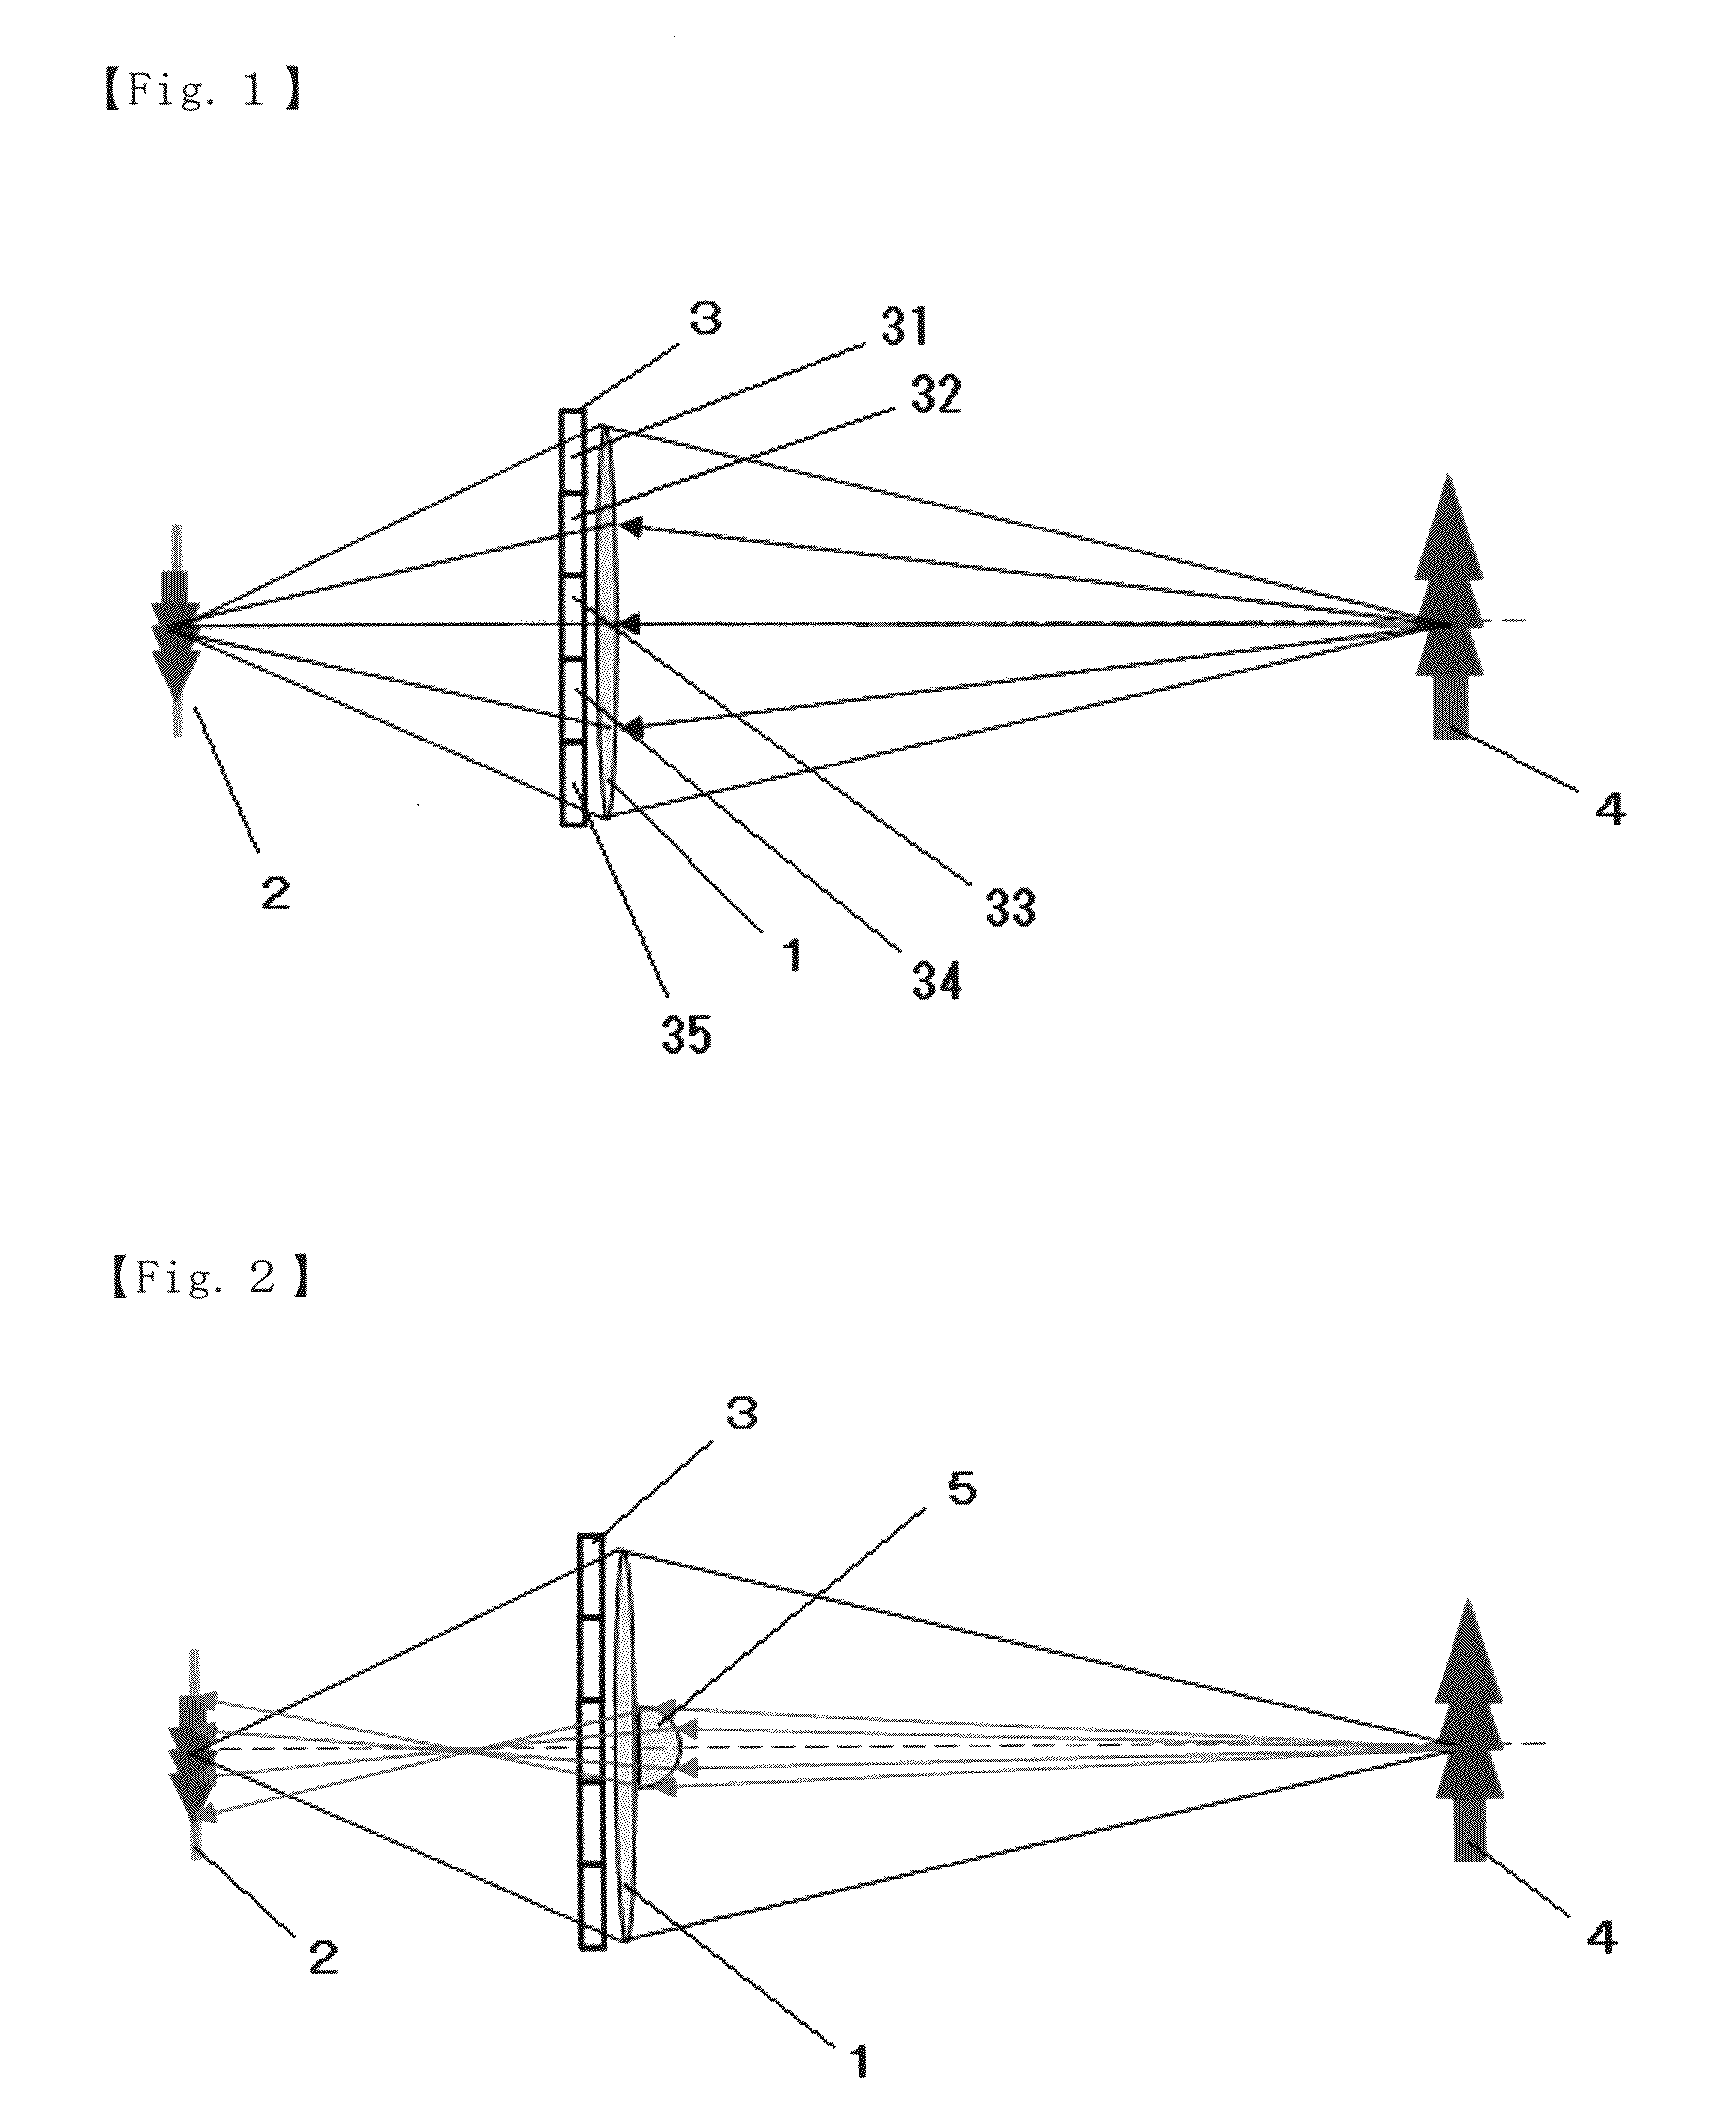 Method for avoidance of an obstacle or an optical phenomenon which distorts quality of image